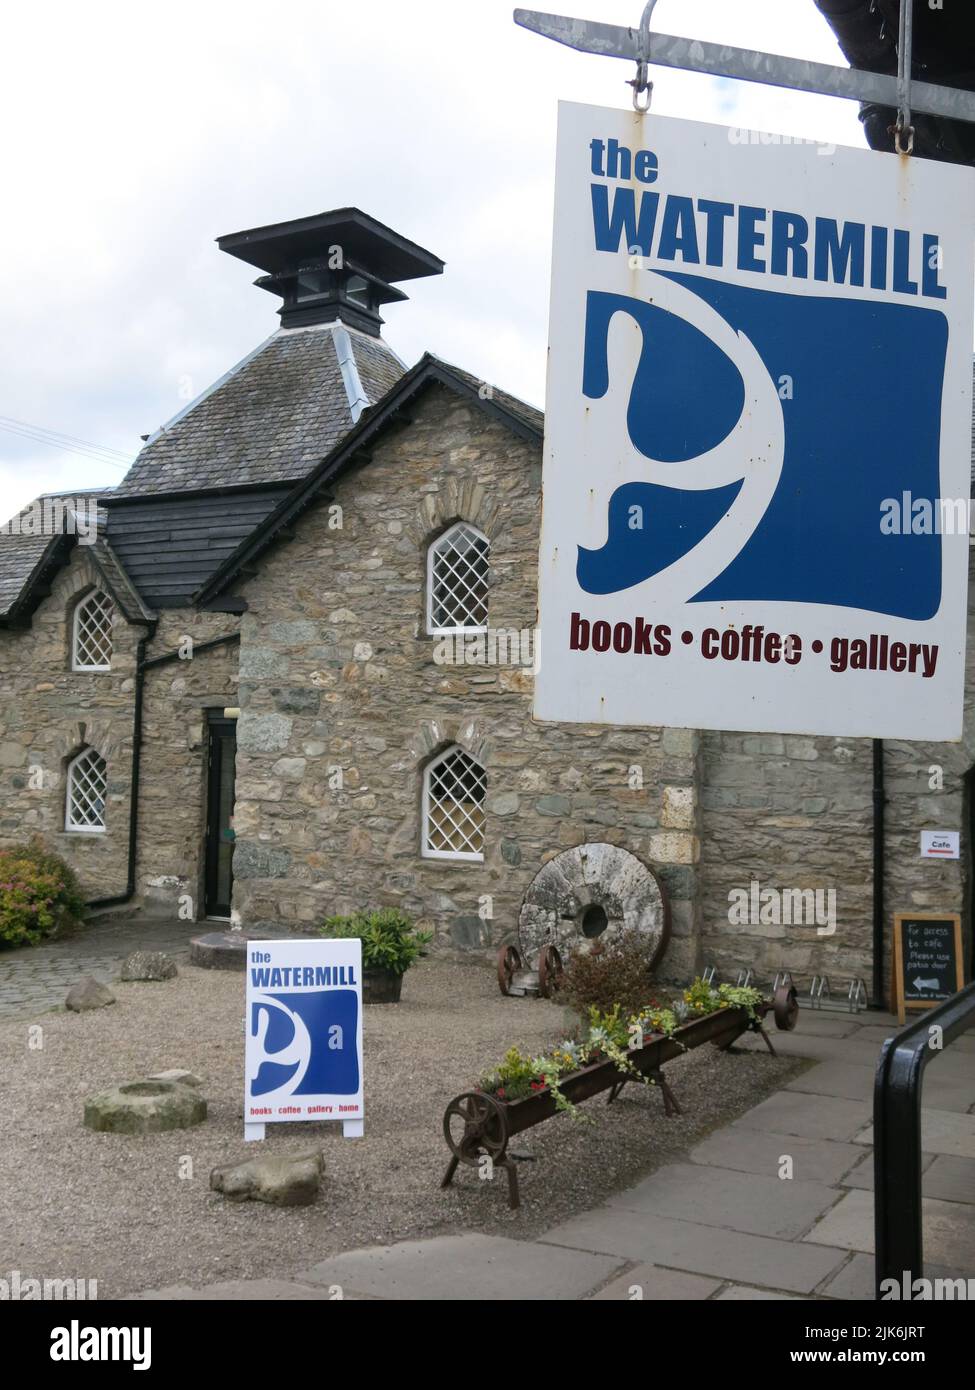 In a former oatmeal mill, The Watermill is an award-winning independent bookshop, gallery & cafe in the Scottish town of Aberfeldy. Stock Photo